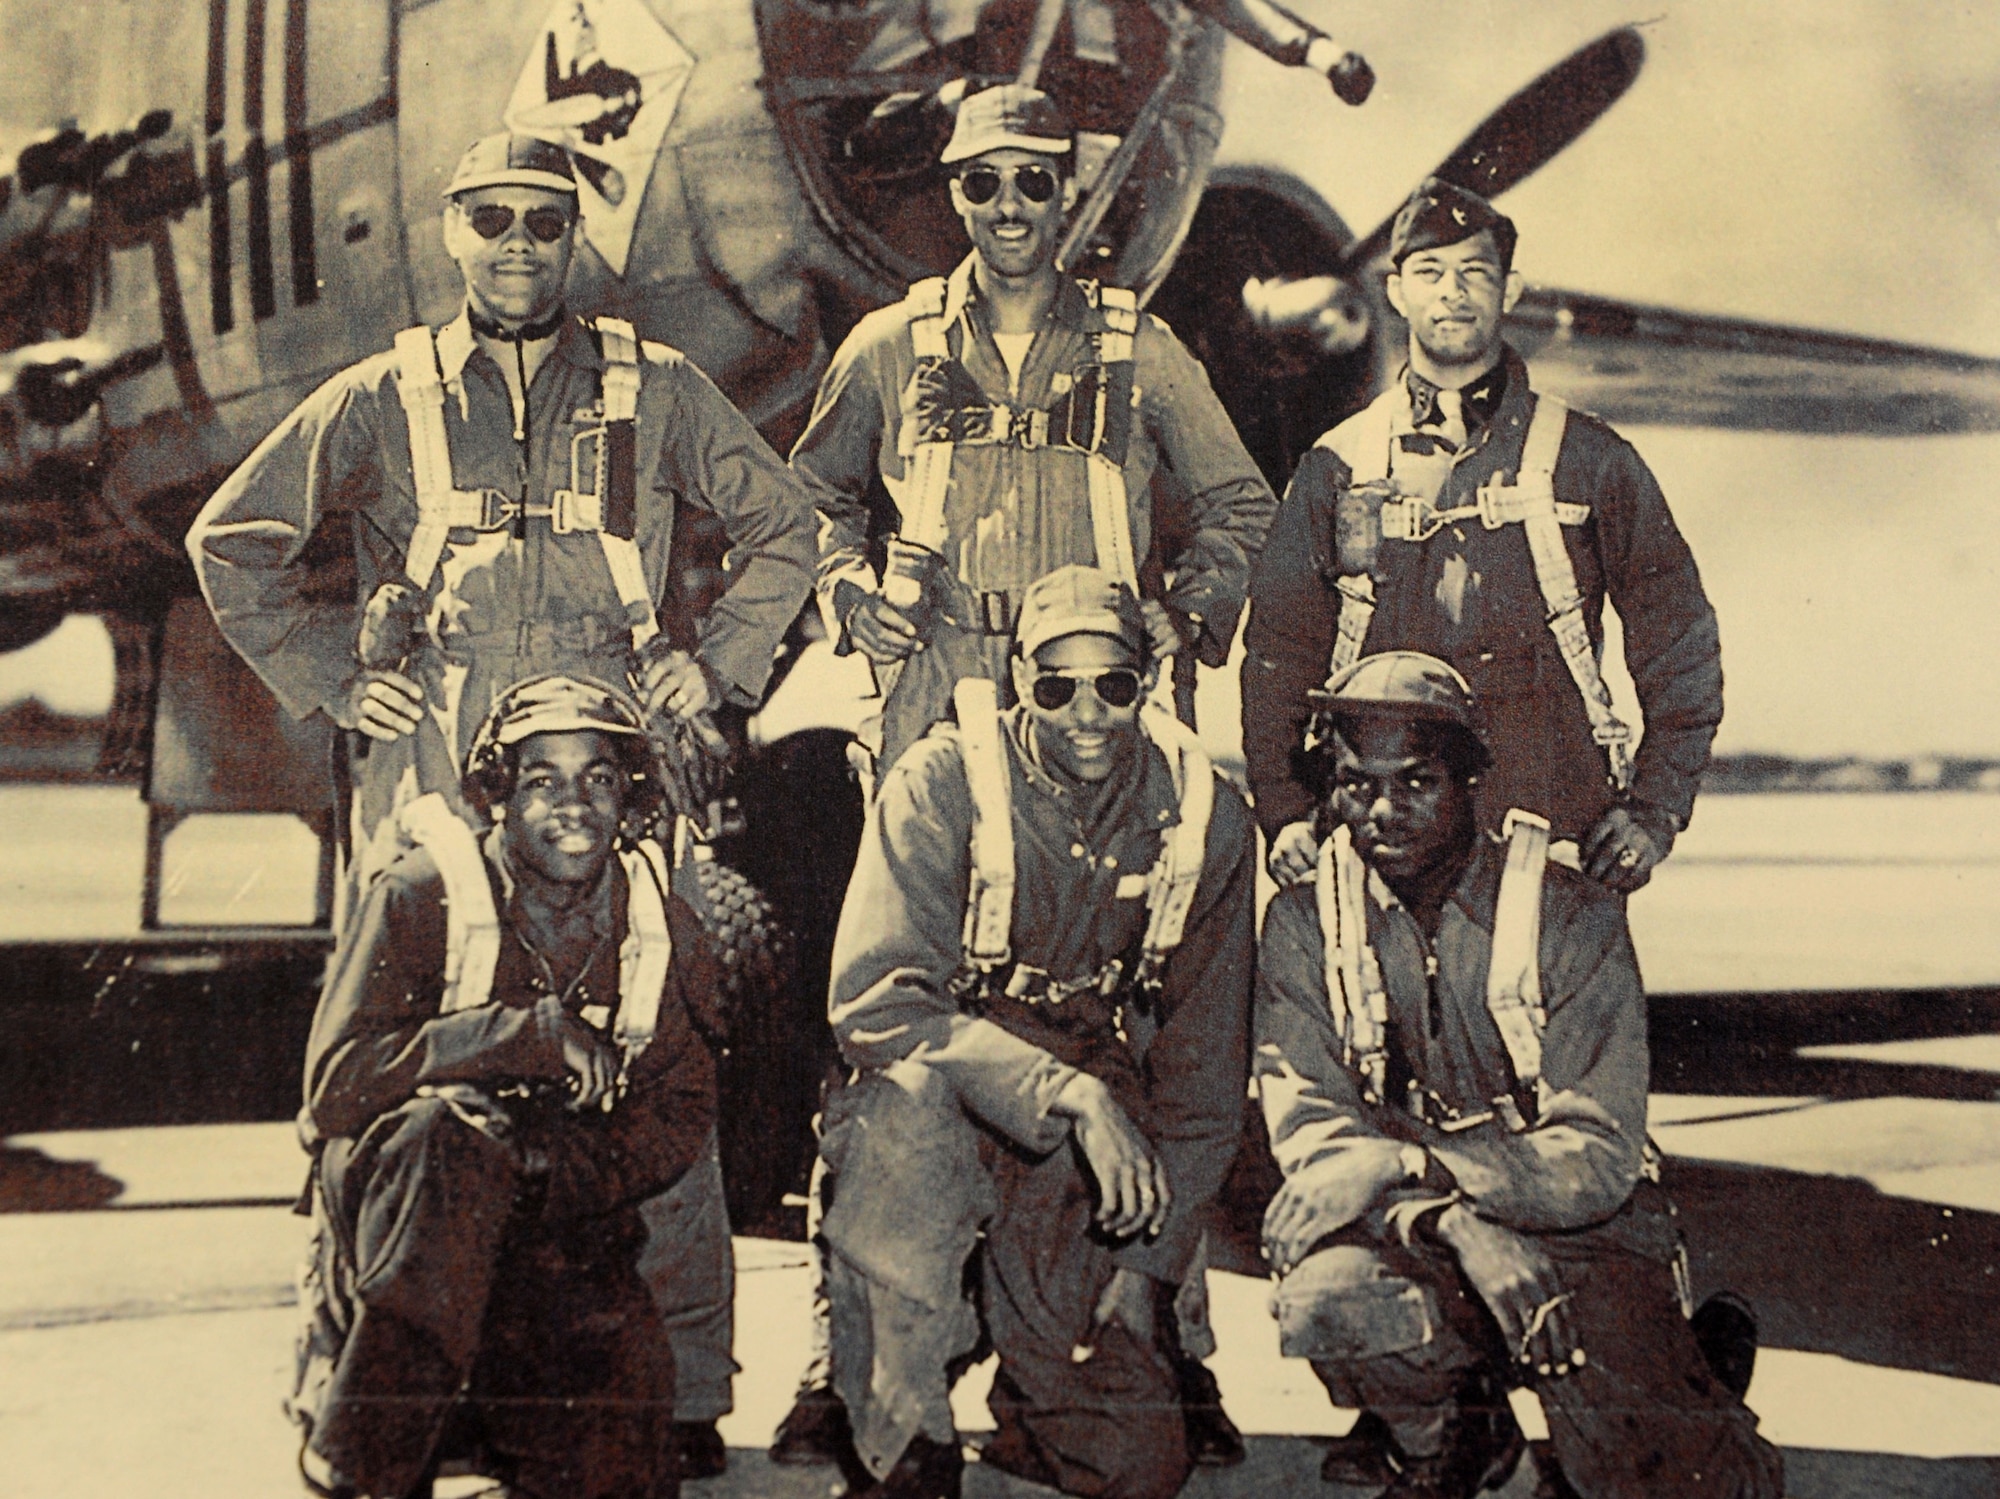 Tuskegee Airman Edward Gibson poses (back row, right) in front of a B-25 bomber with his crew during World War II. Gibson served in the Army Air Corps as a bombardier-navigator and logged 2,300 flight hours. (Courtesy Photo)